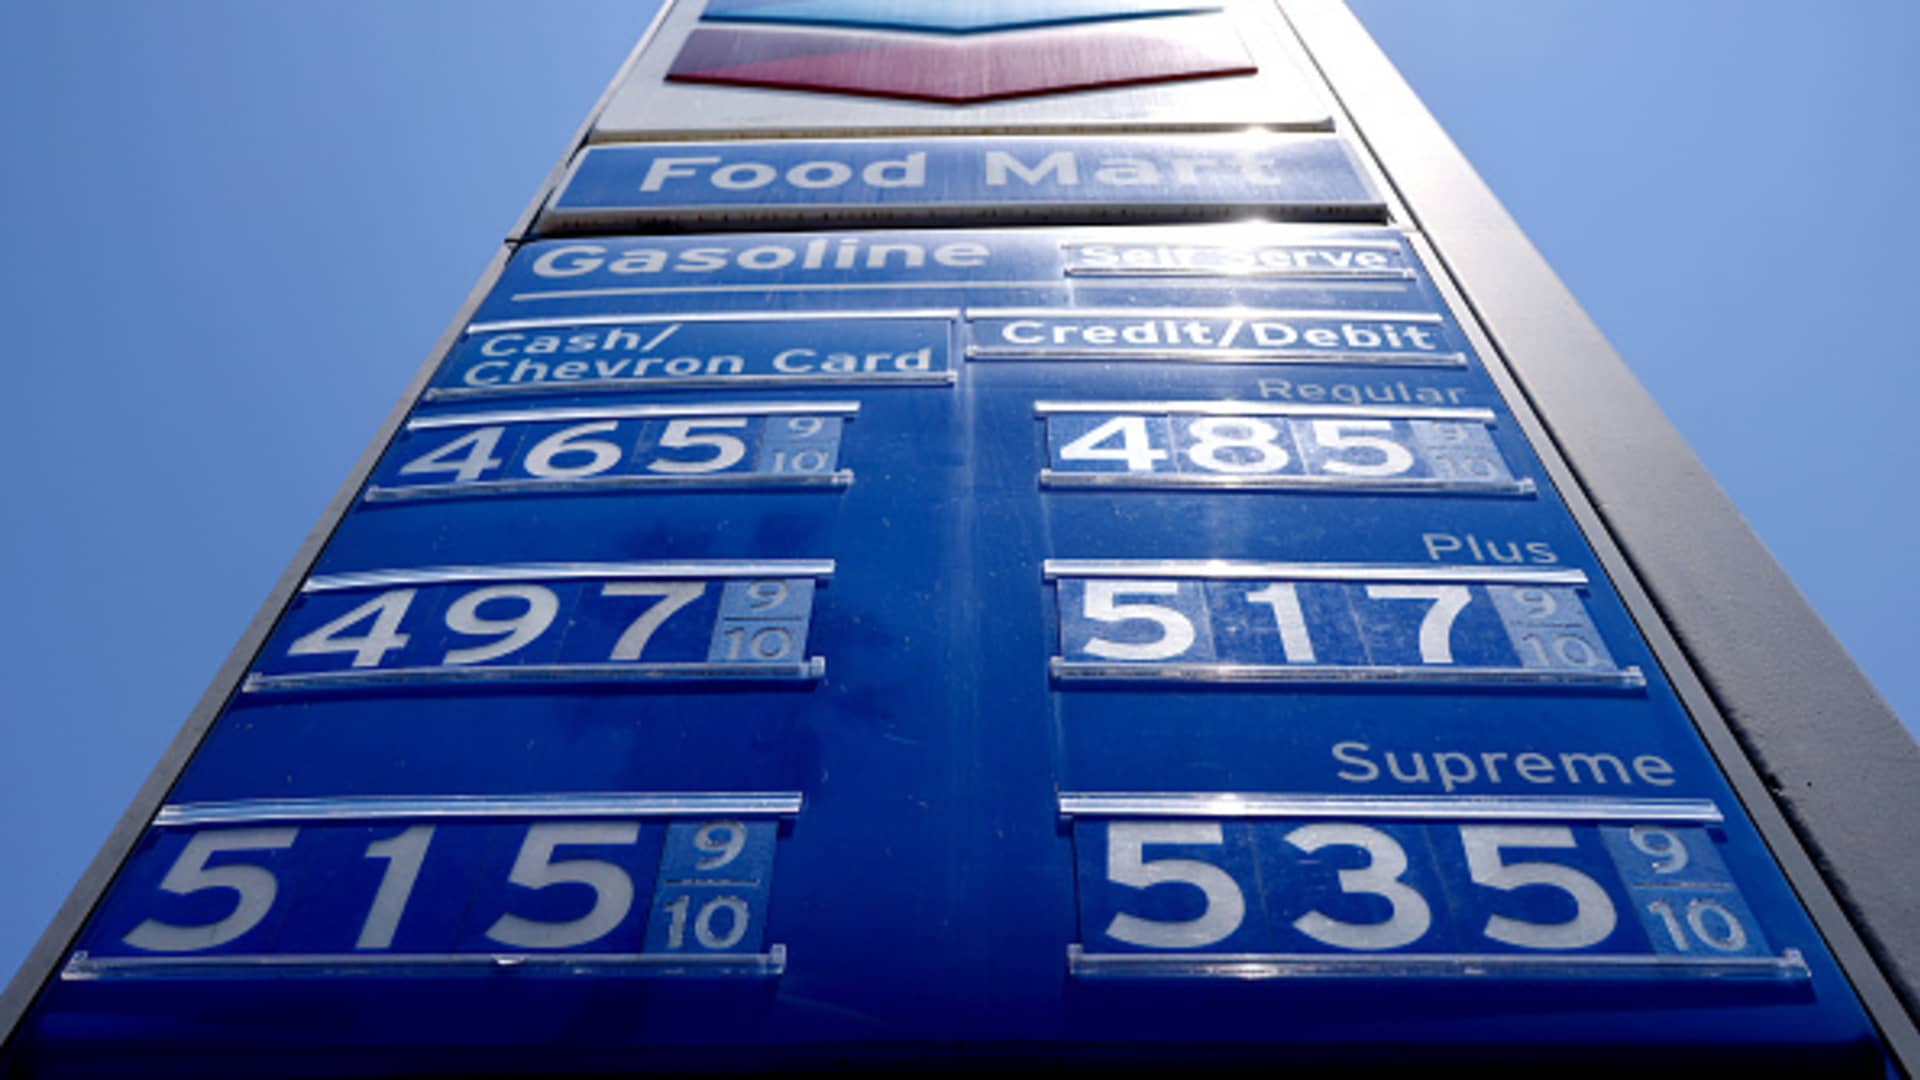 Gas prices are displayed at a Chevron station on June 14, 2021 in Los Angeles, California.